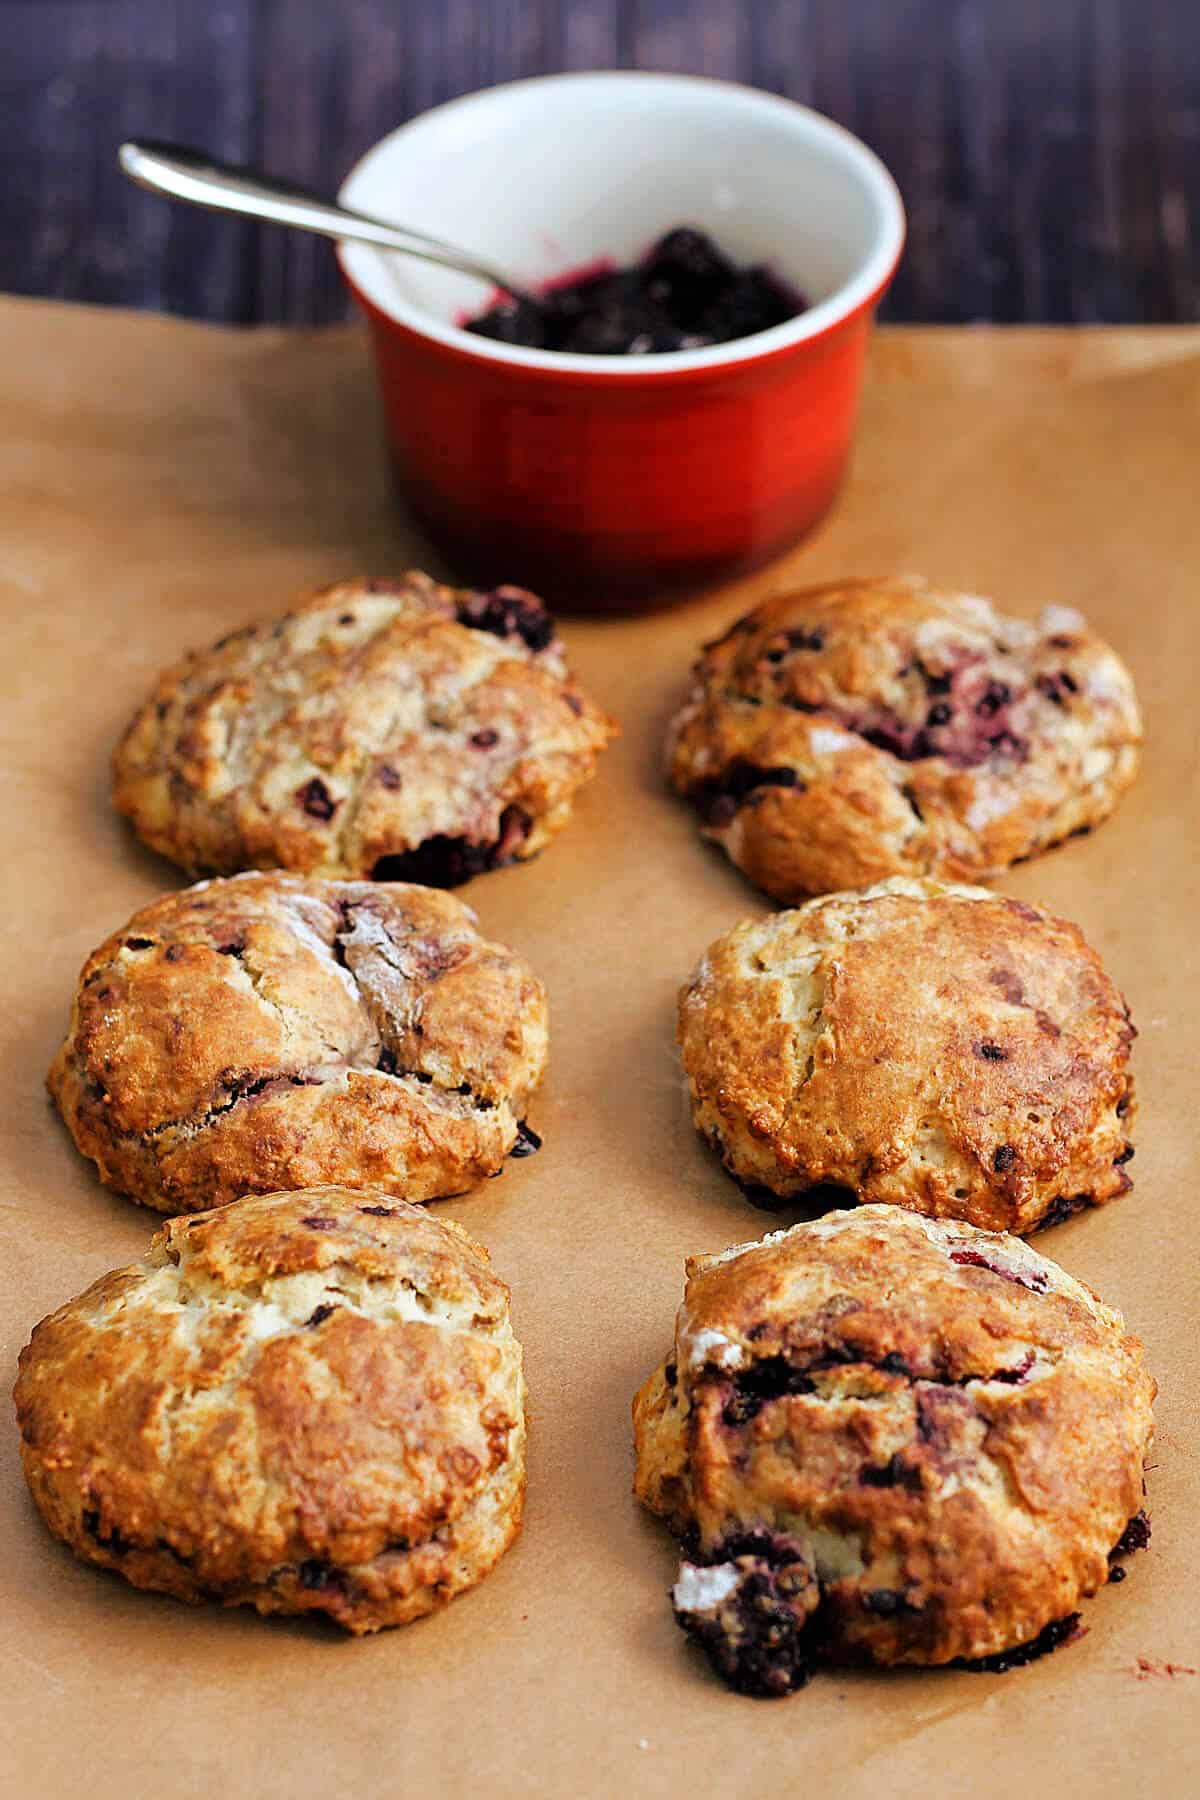 Six blackberry scones and a pot of jam.